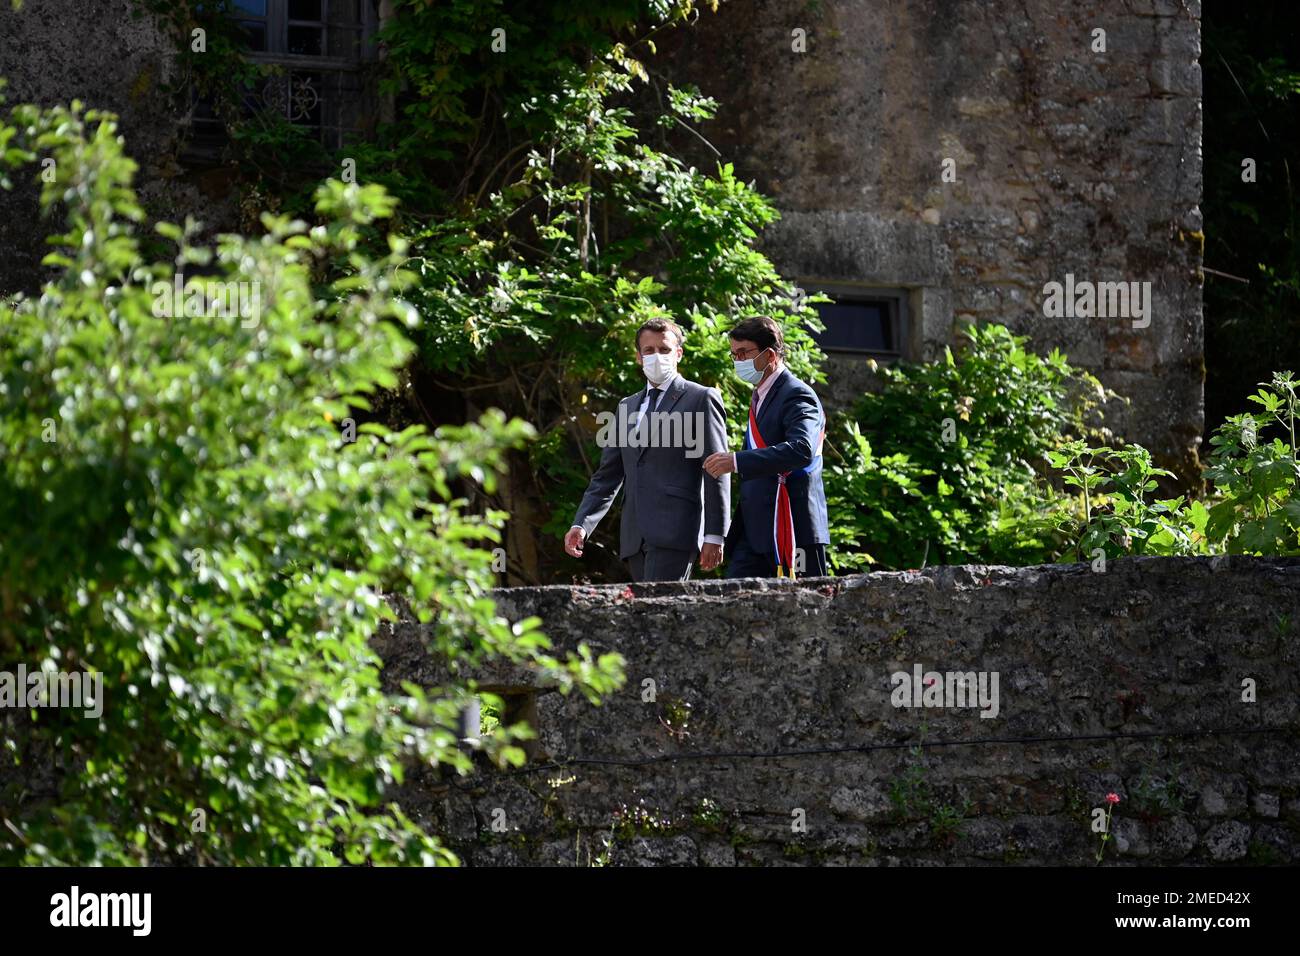 French President Emmanuel Macron, left, and French mayor Gerard Miquel  visit in Saint-Cirq-Lapopie, near Cahors, southwestern France, Wednesday,  June 2, 2021. Macron is on a two-day visit in the Lot region to